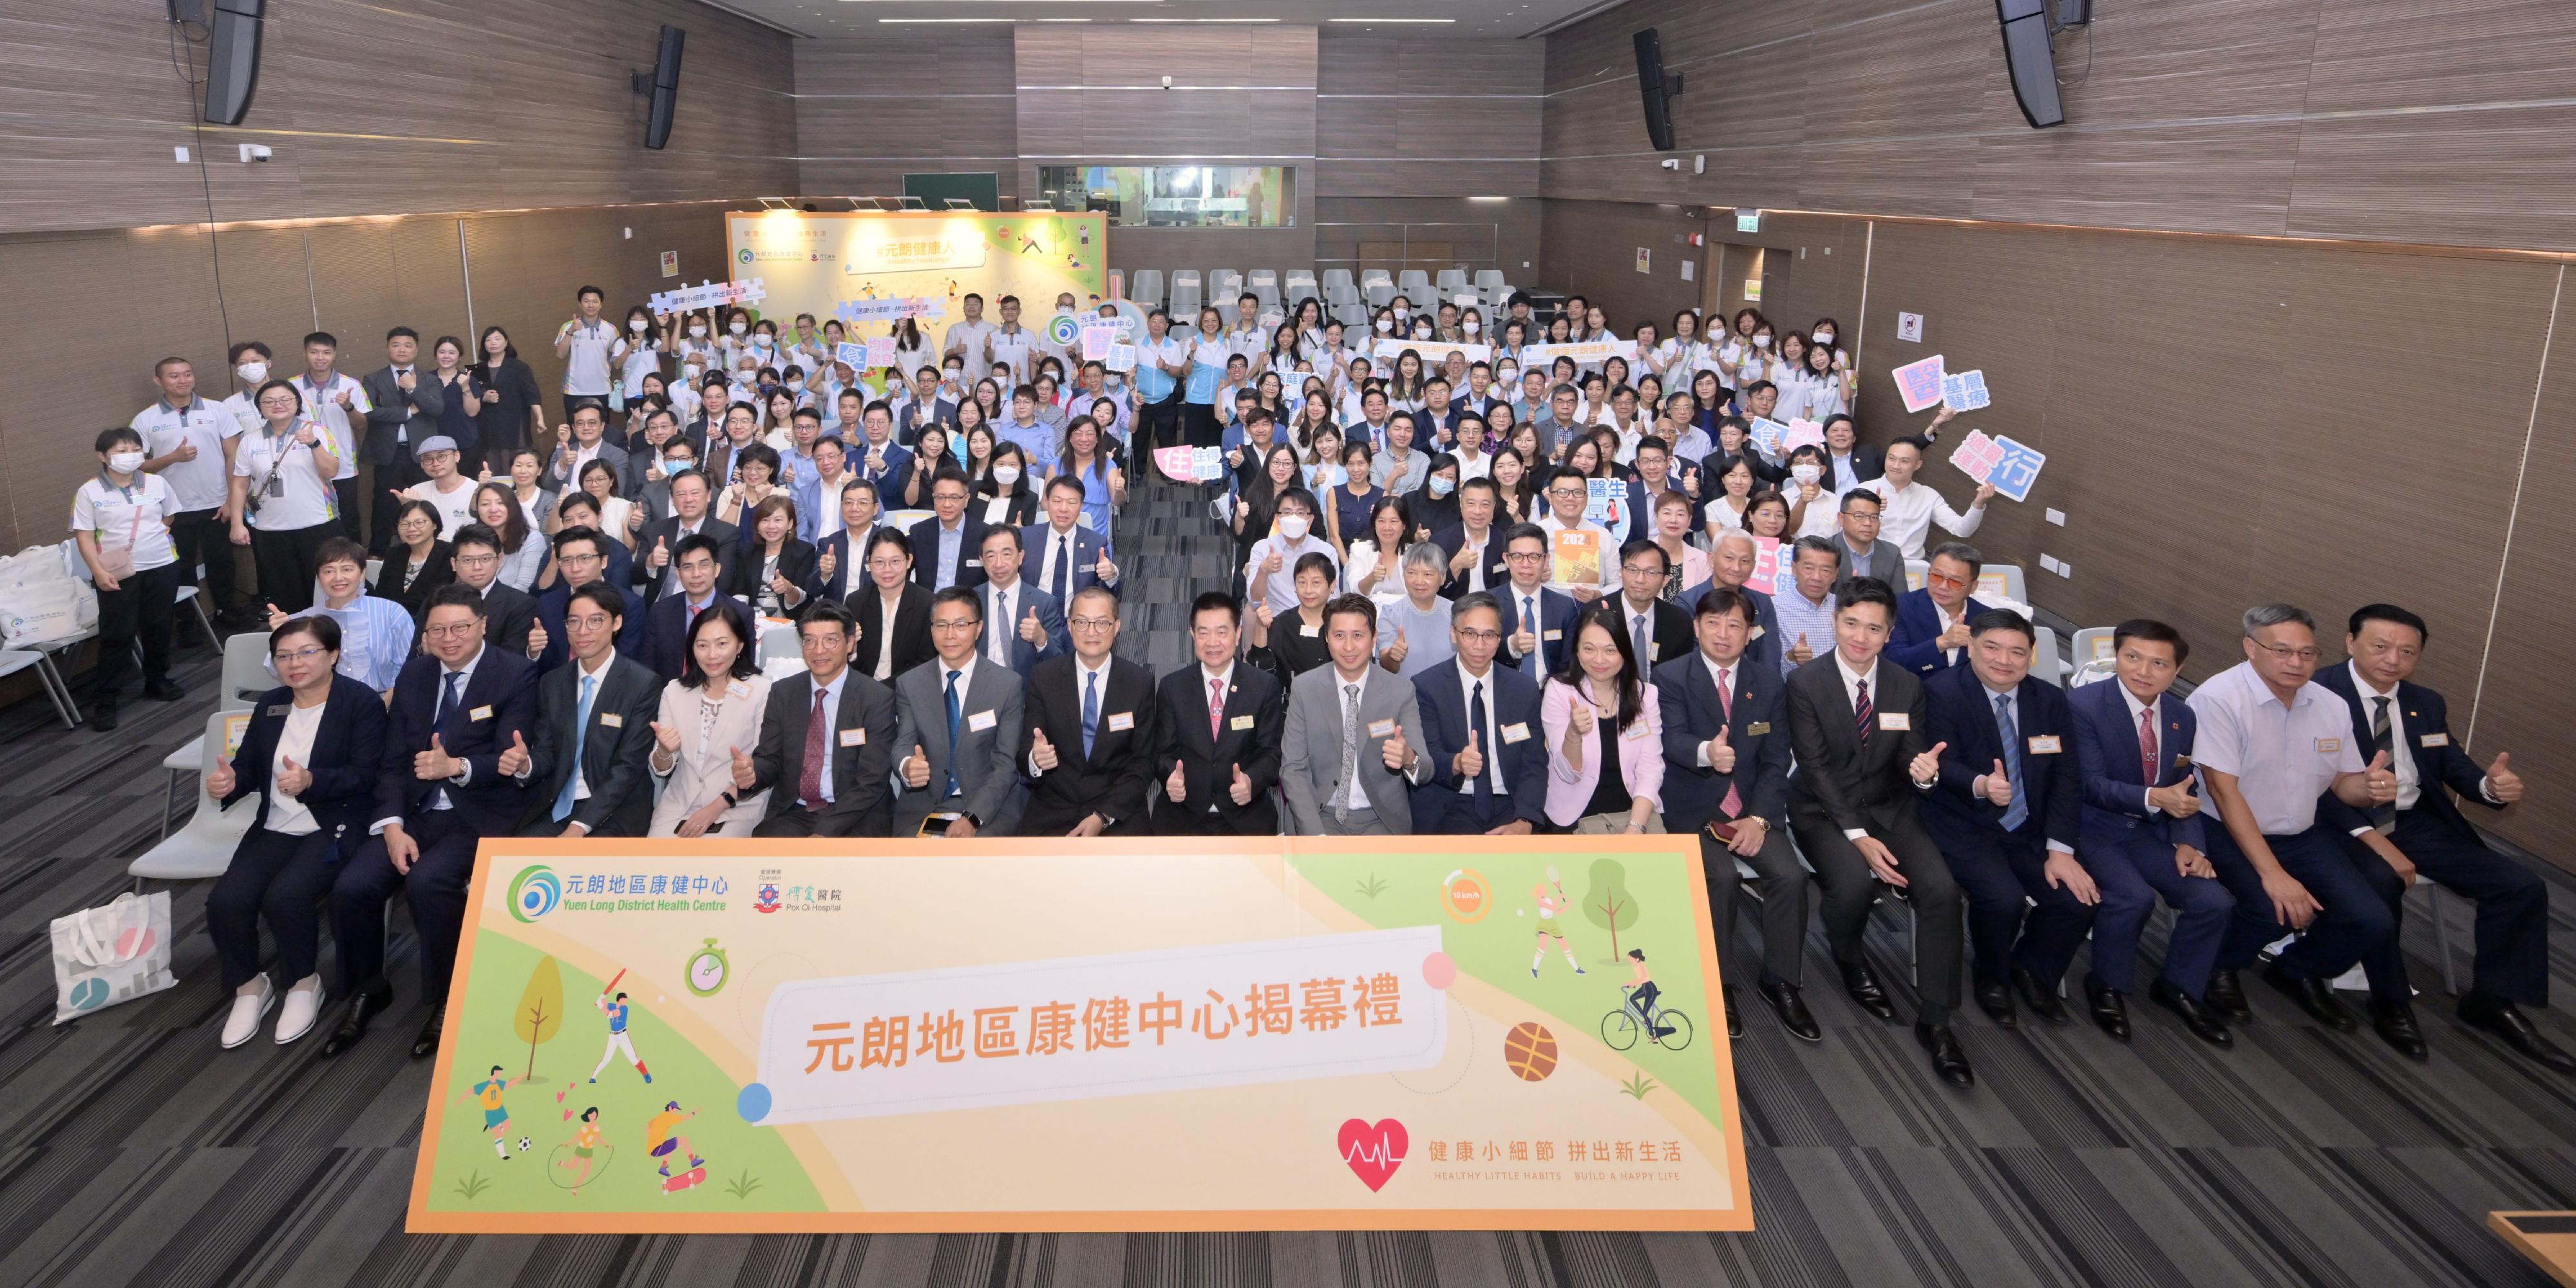 The Secretary for Health, Professor Lo Chung-mau, officiated at the opening ceremony of the Yuen Long District Health Centre today (September 5). Photo shows Professor Lo (front row, seventh left); the Commissioner for Primary Healthcare, Dr Pang Fei-chau (front row, fifth left); the Chairman of Yuen Long District Council, Mr Shum Ho-kit (front row, ninth right); the Deputy Director General of the New Territories Sub-office of the Liaison Office of the Central People's Government in the Hong Kong Special Administrative Region, Mr Li Gongxun (front row, sixth left); the Chairman of the Board of Directors of Pok Oi Hospital, Dr Chan Shou-ming (front row, eight left), and other participants.